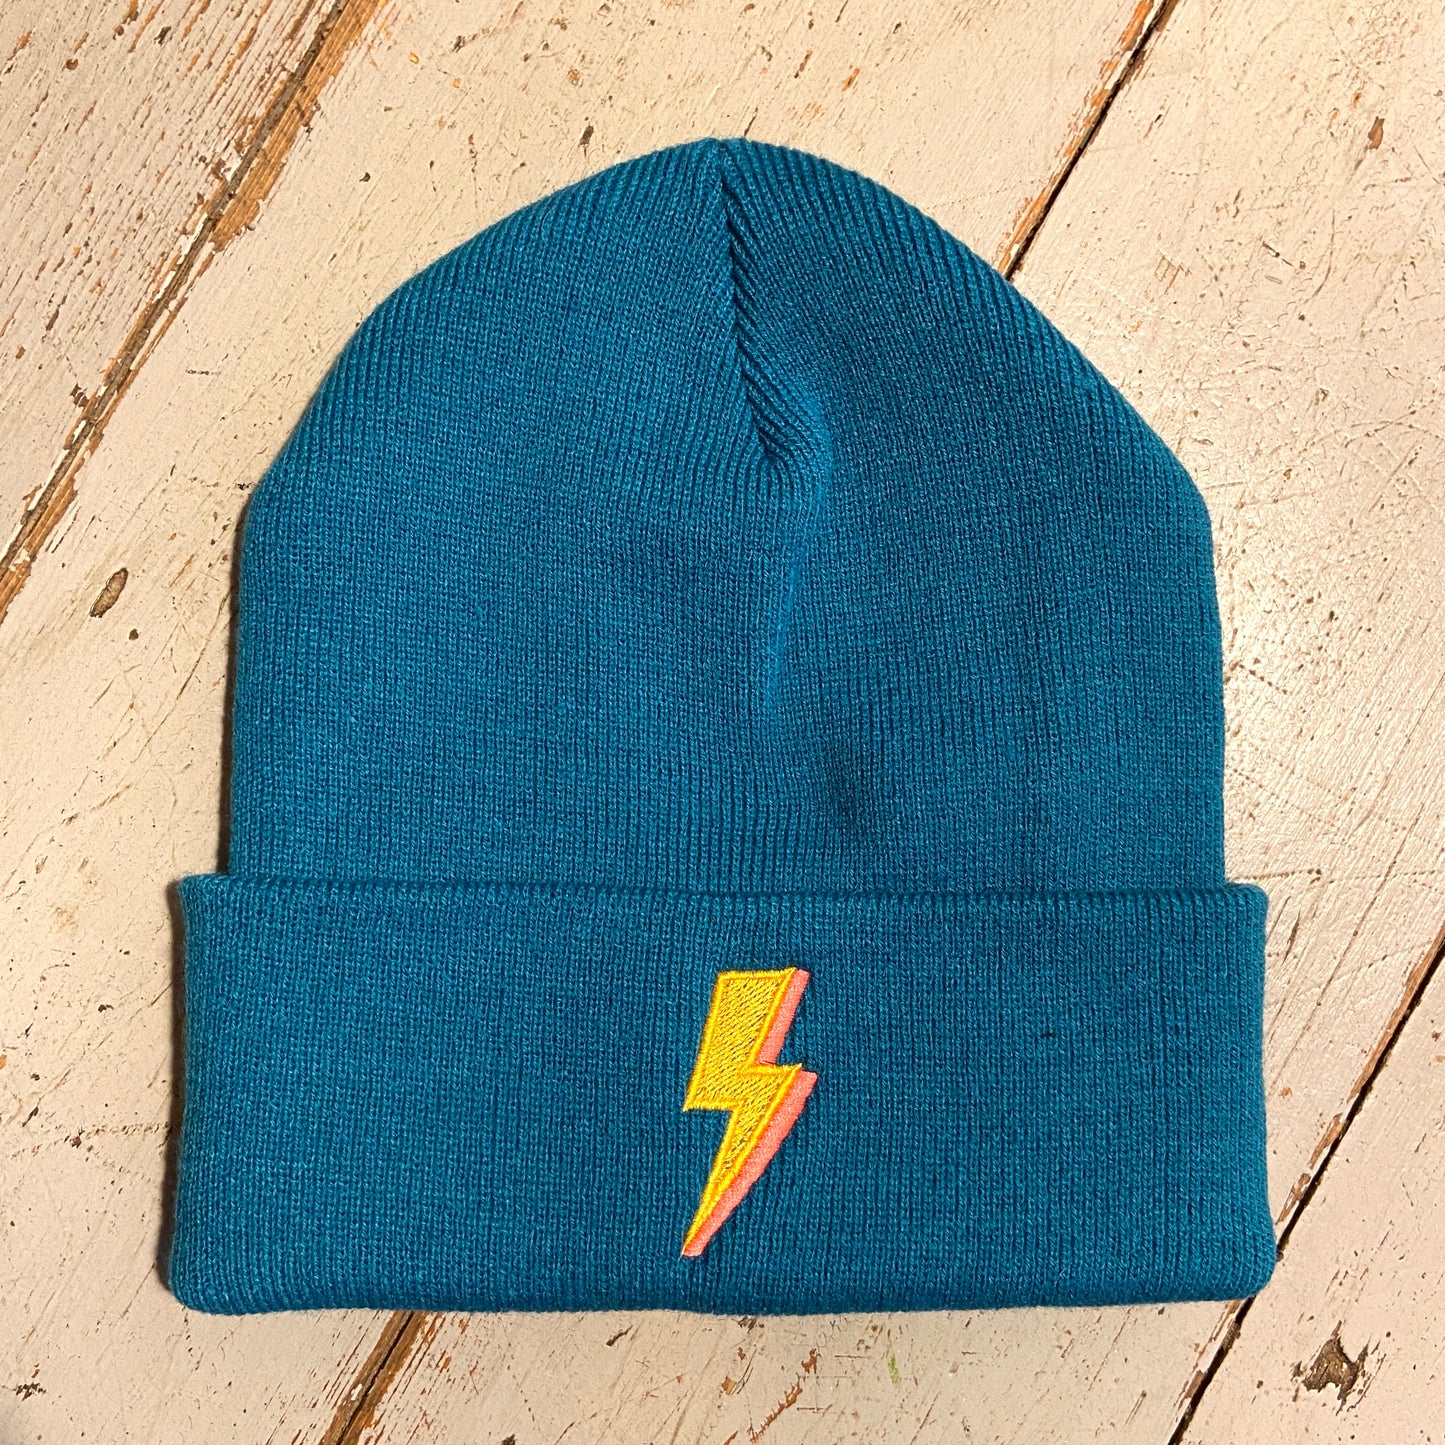 Embroidered to match our ever popular lighting bolt design.  Available in Teal or black  Beanies are made from 100% soft-touch acrylic in a double layer knit. One size fits all. Glitter & Mud